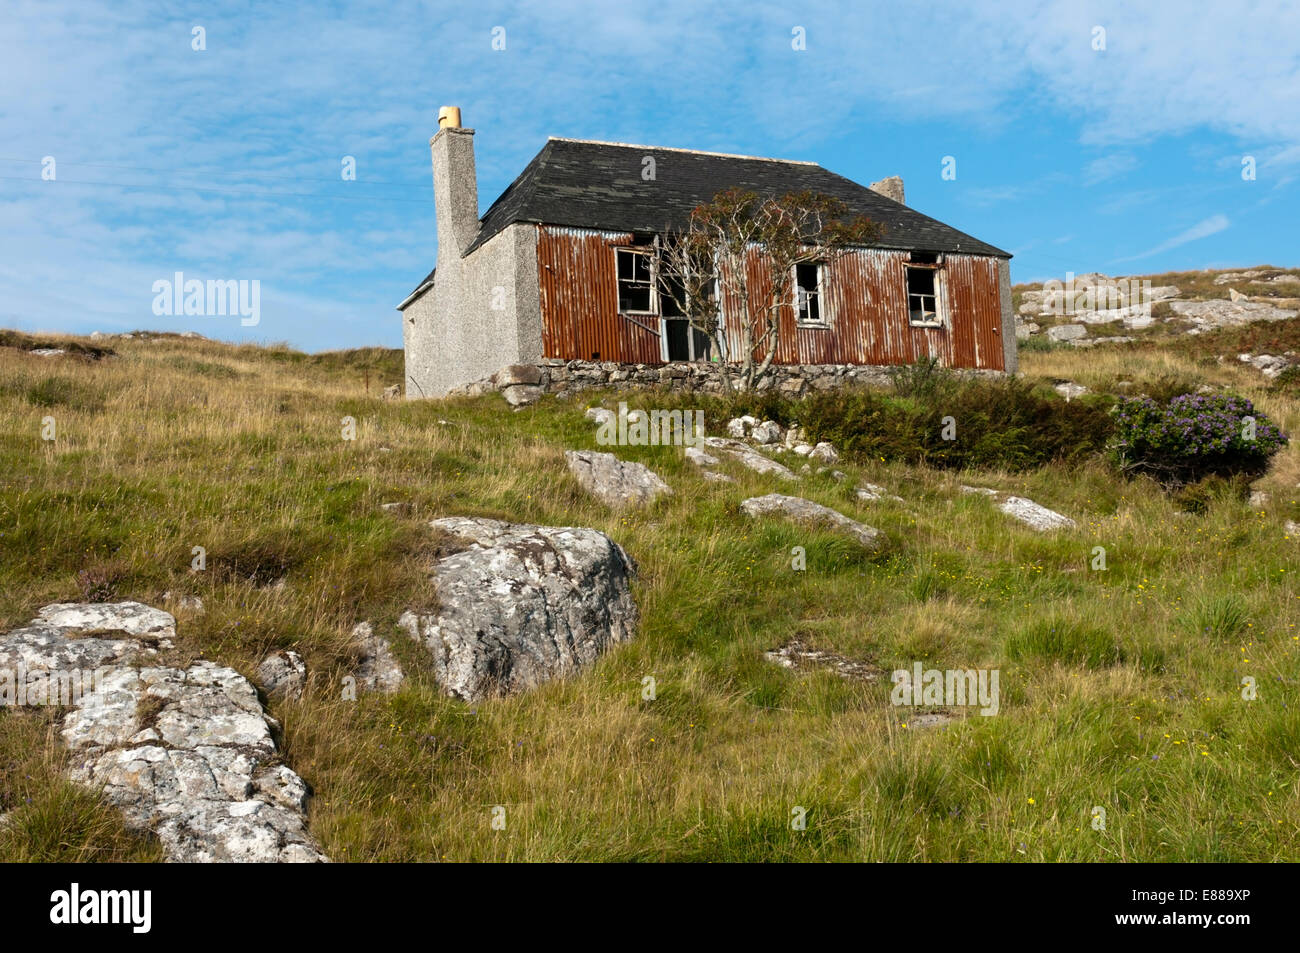 A rusty, semi-derelict corrugated iron building on the Hebridean island of Scalpay. Stock Photo